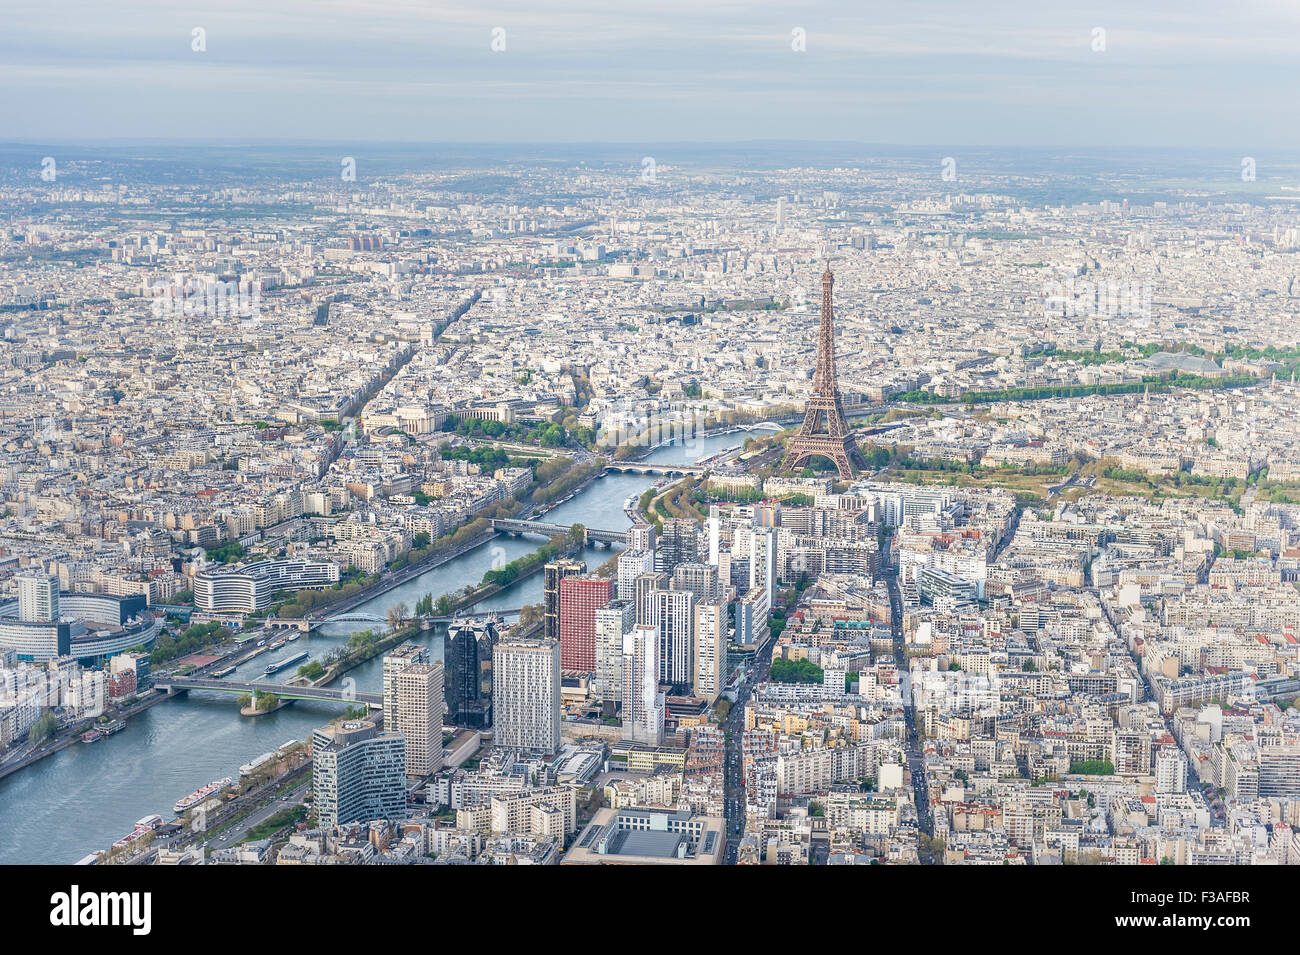 Aerial view of Paris city center with the Seine river and its bridges in the foreground and the Eiffel tower in the background. Stock Photo